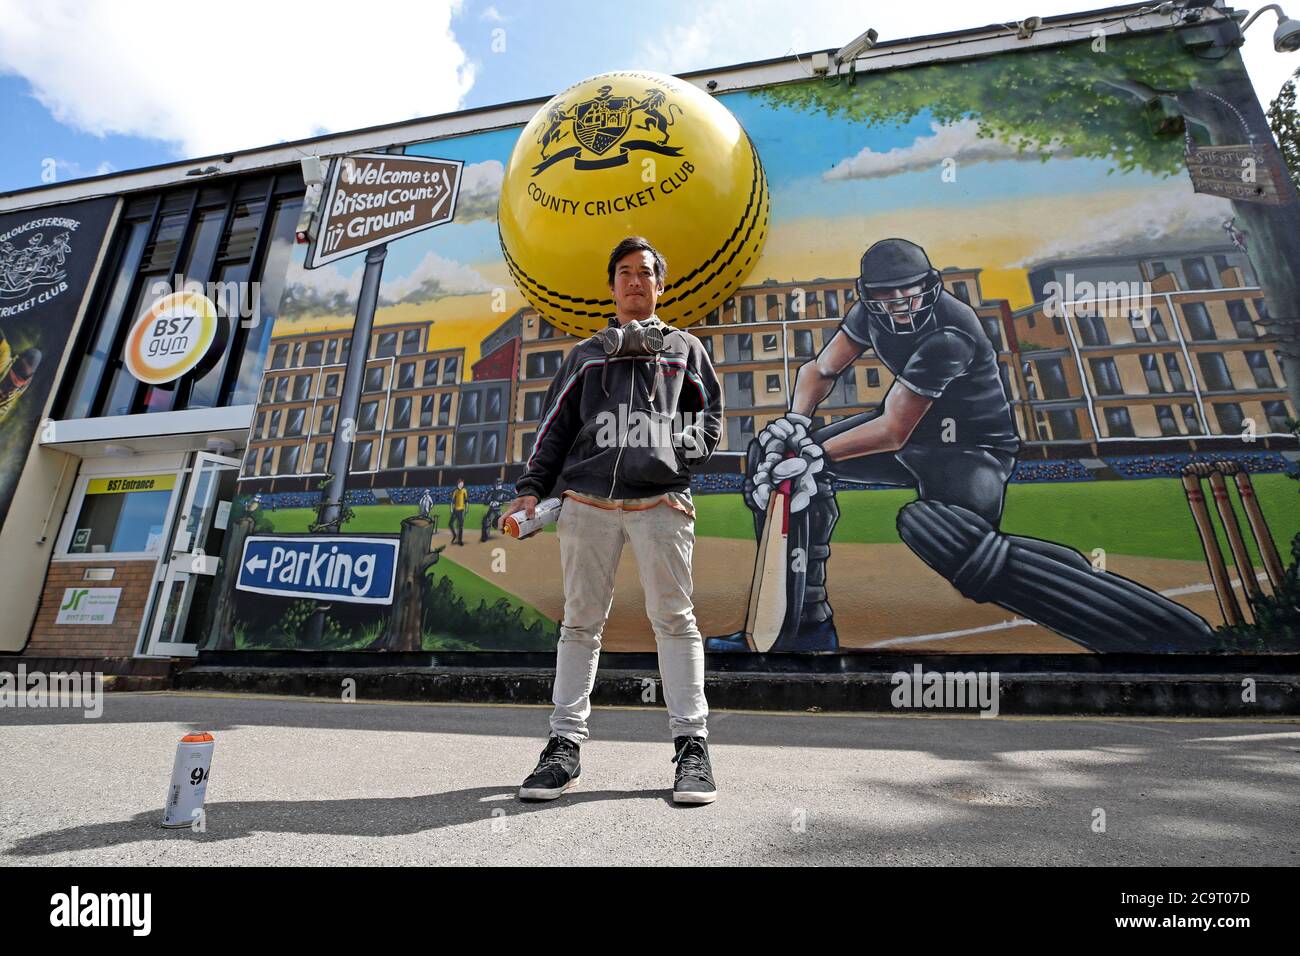 Graffiti artist Silent Hobo poses for a photo in front of his painted mural at Bristol County Ground. Stock Photo